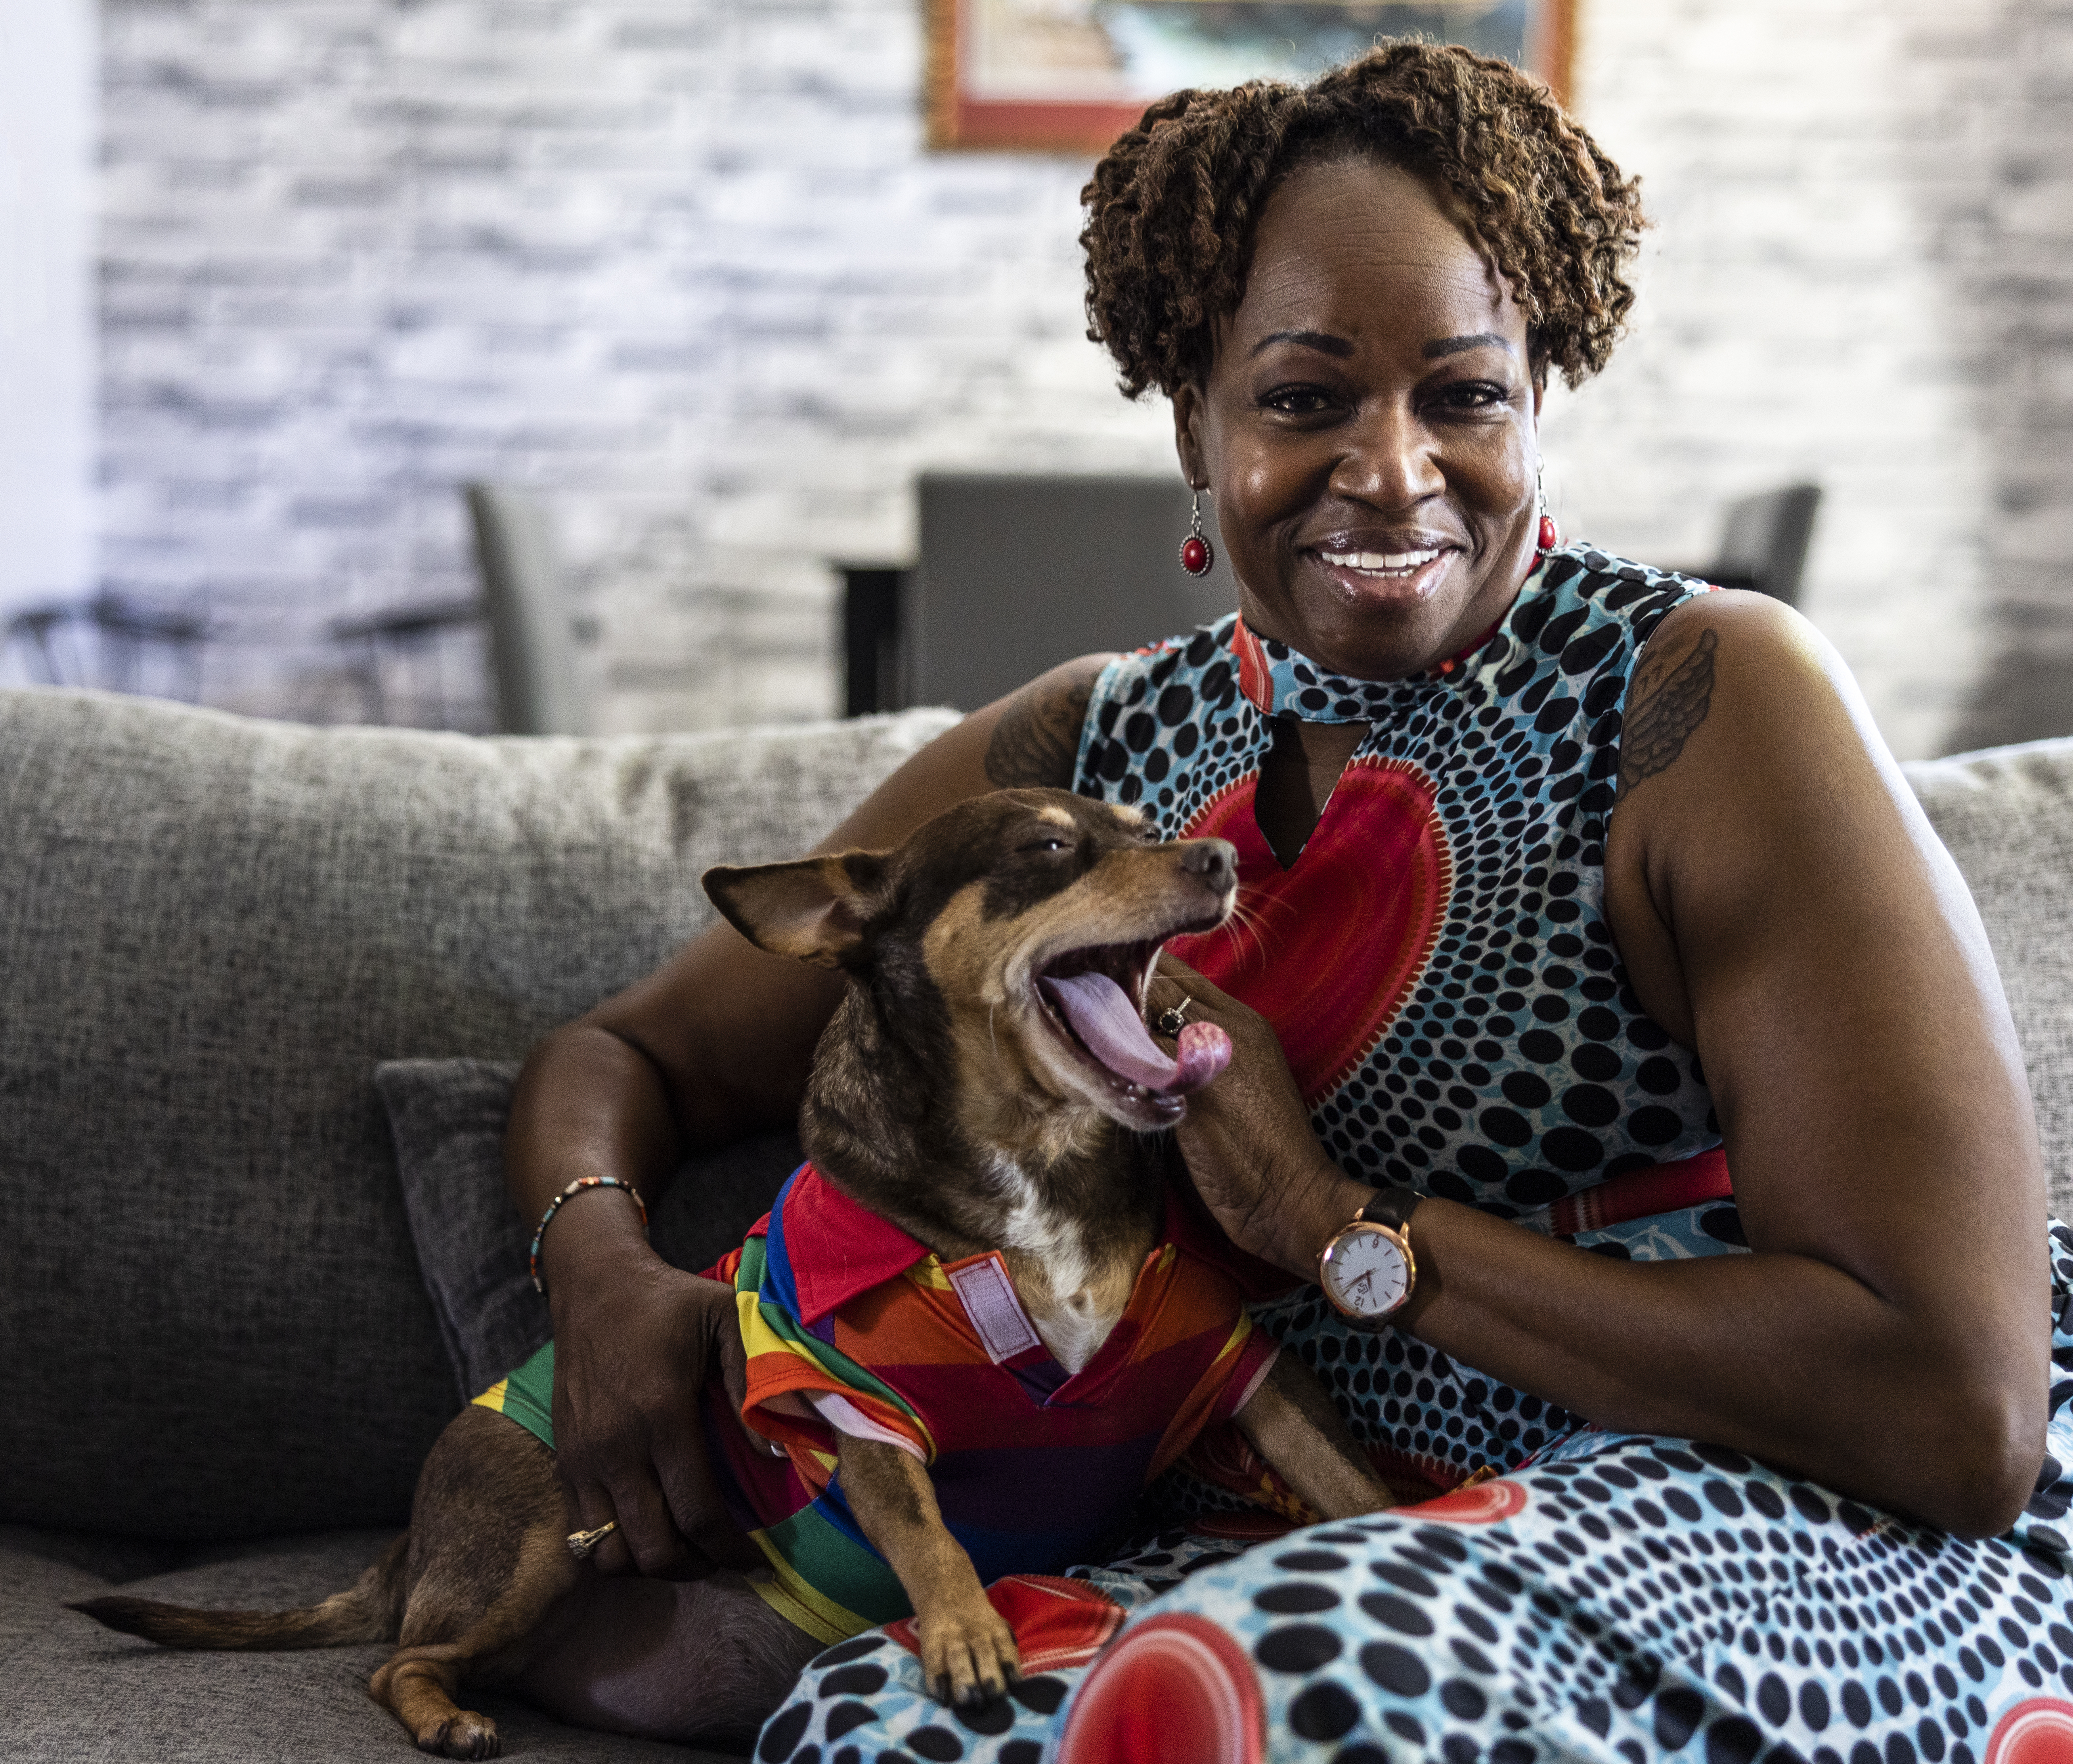 Photo: woman and dog sitting on couch